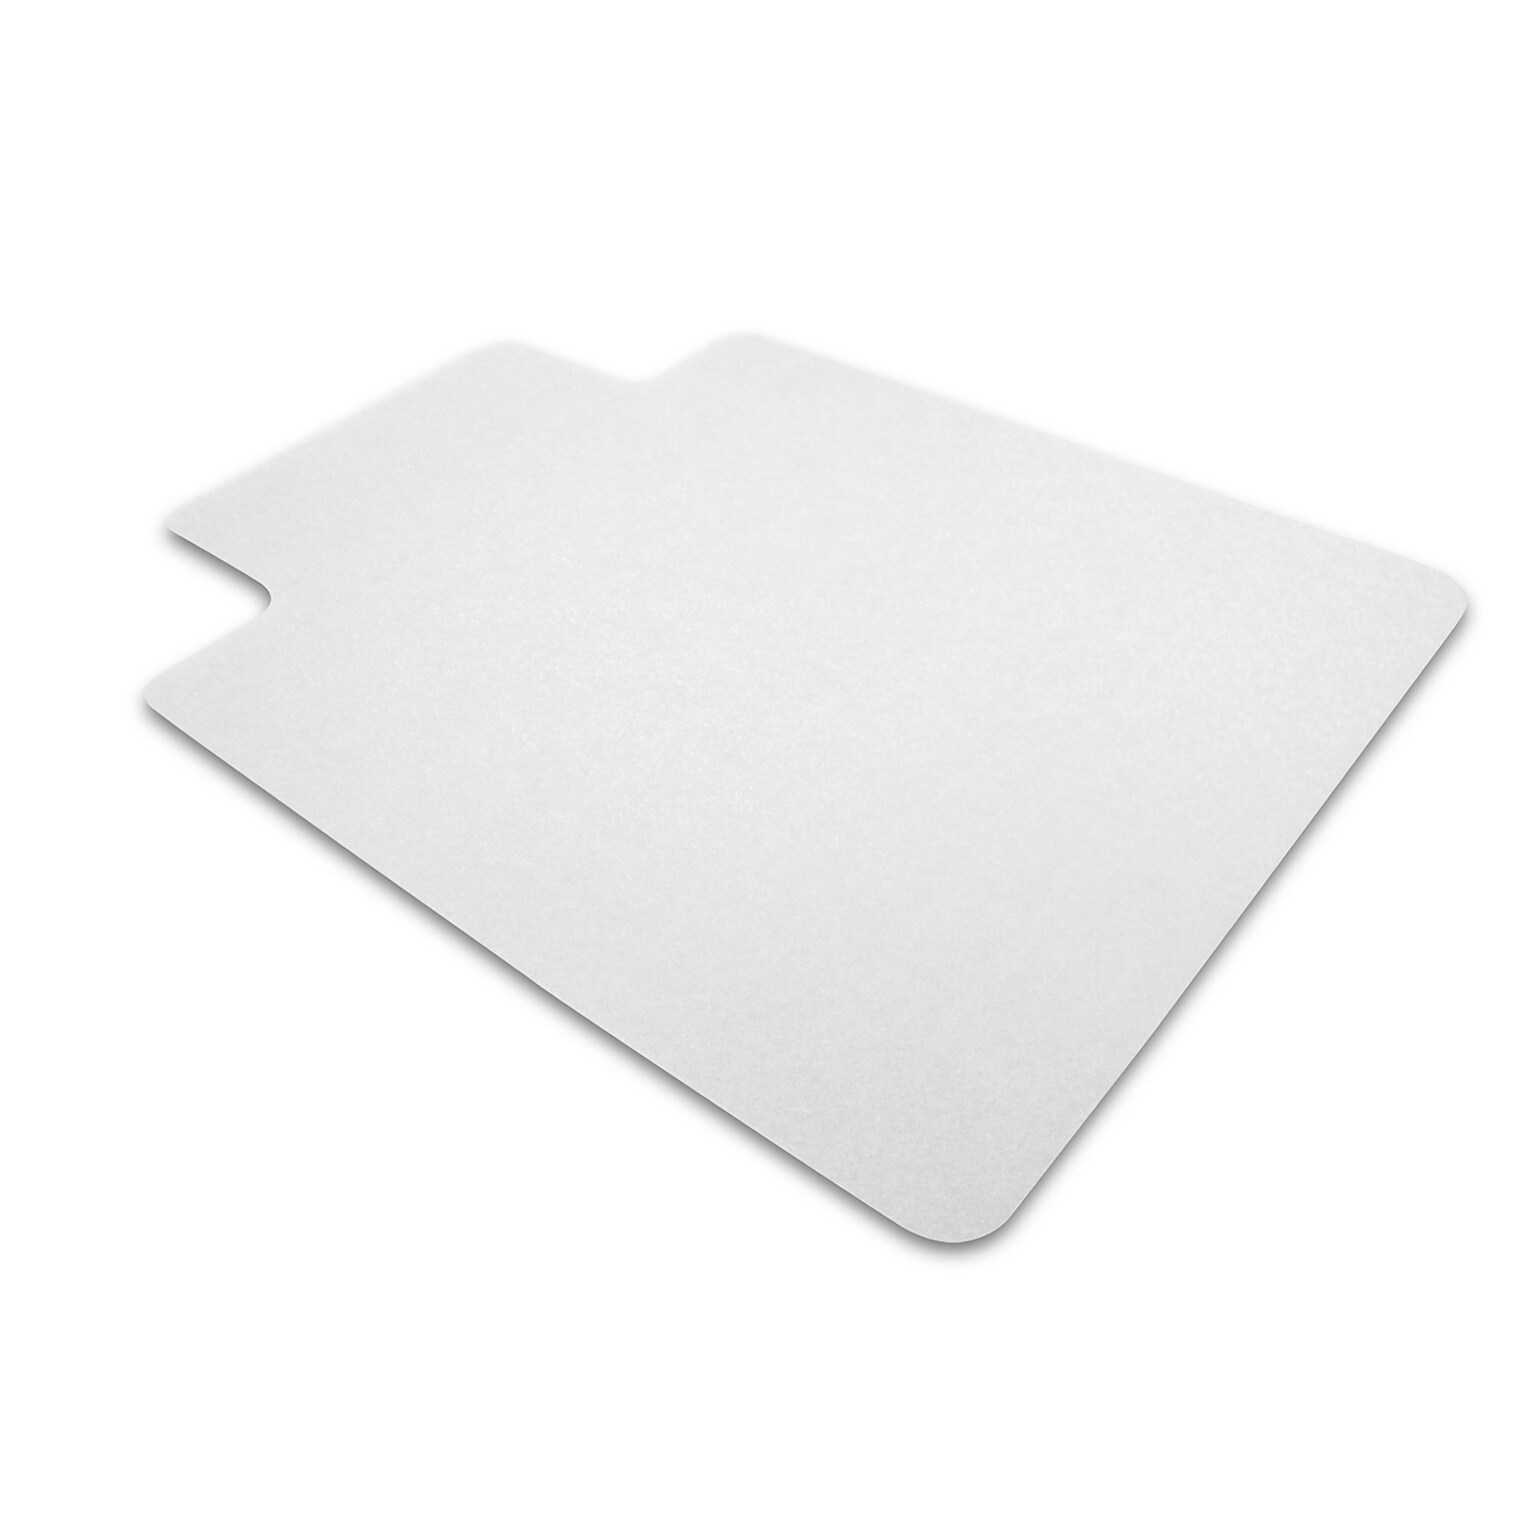 Floortex Cleartex Unomat Hard Floor and Carpet Tiles Chair Mat with Lip, 48 x 60, Clear Polycarbonate (1215020LRA)